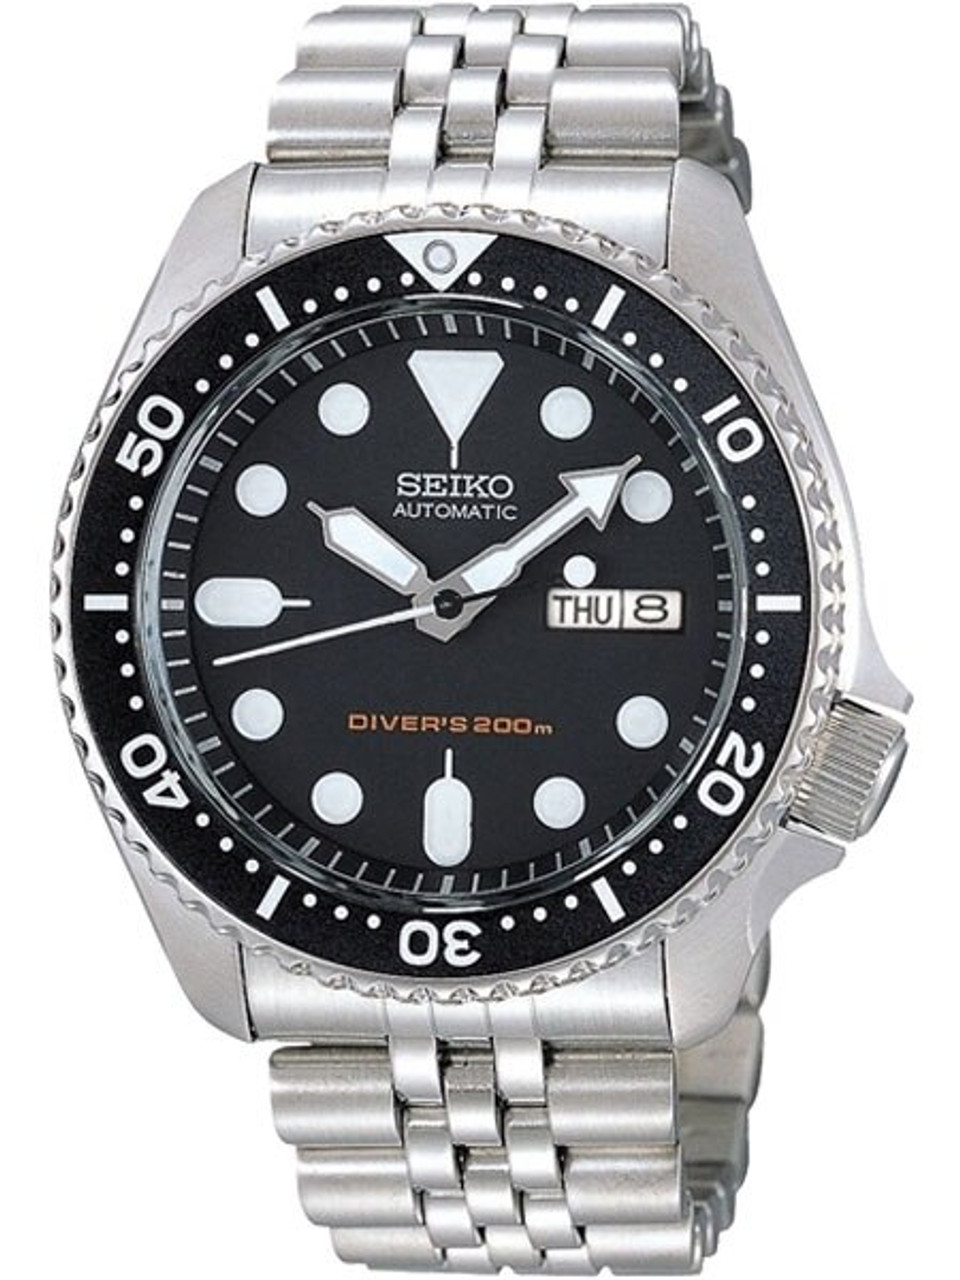 Seiko Automatic Dive Watch with Stainless Steel Bracelet #SKX007K2